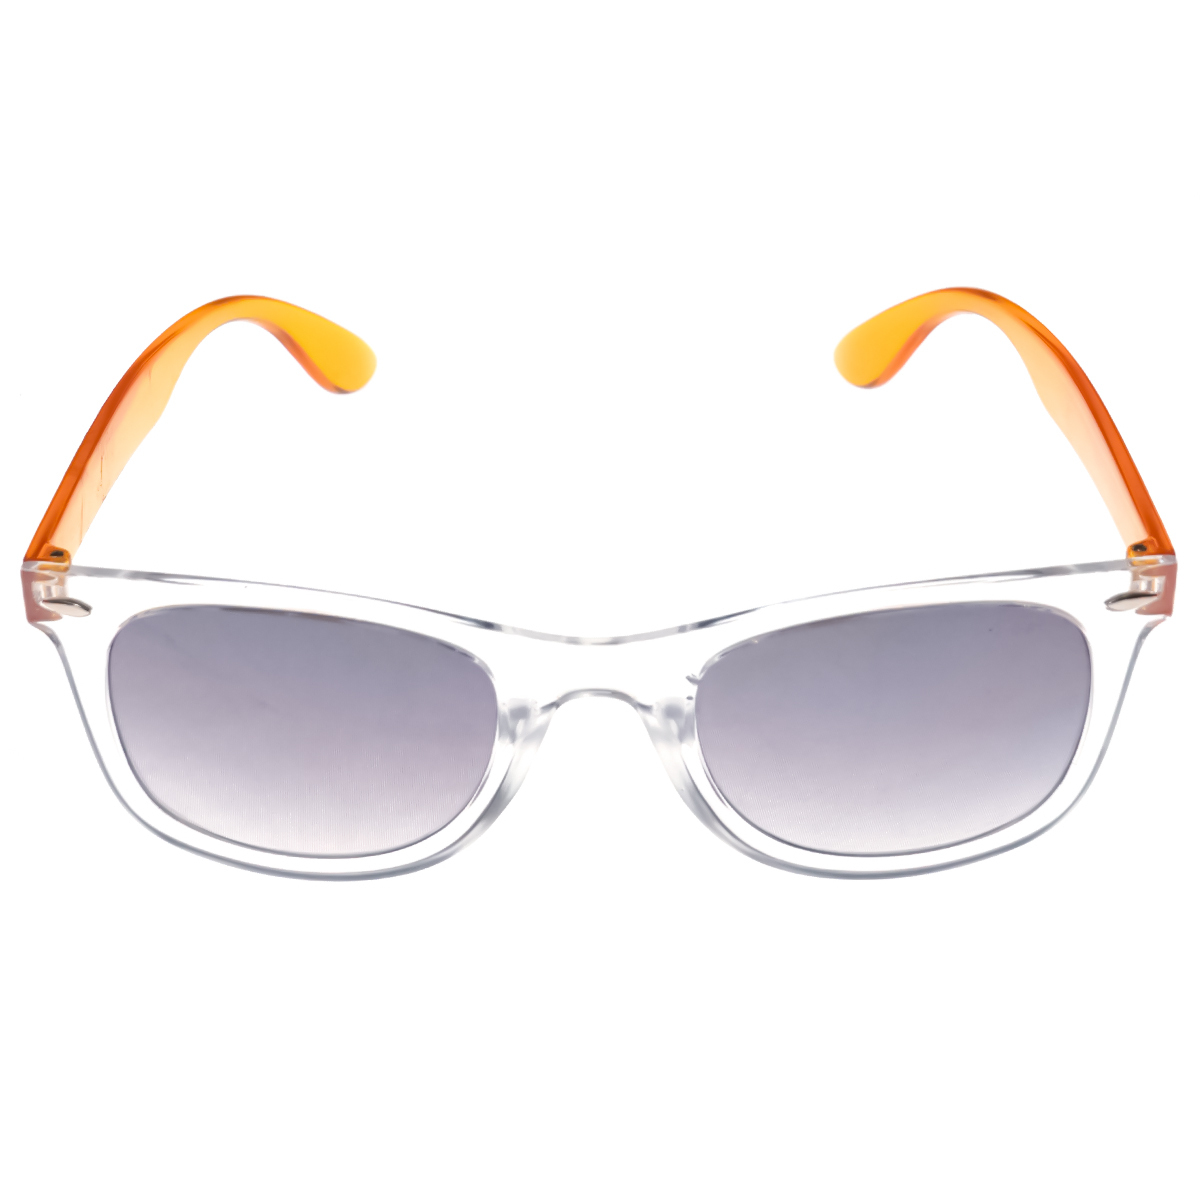 Idee Mens Shiny Crystal-Shiny Light Gold Part Frame With White Mirror Lens Sunglass